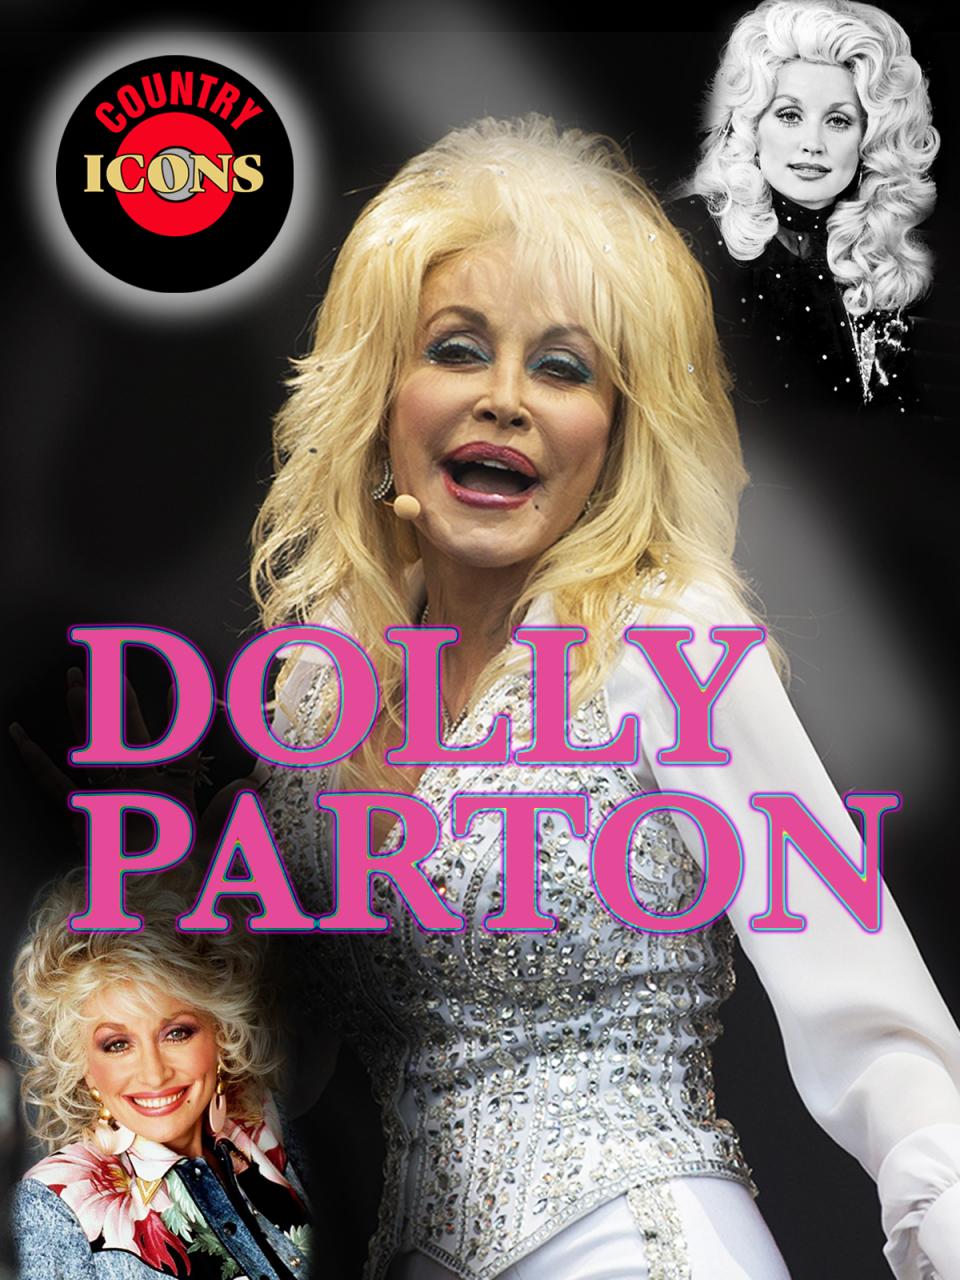 Country Icons: Dolly Parton